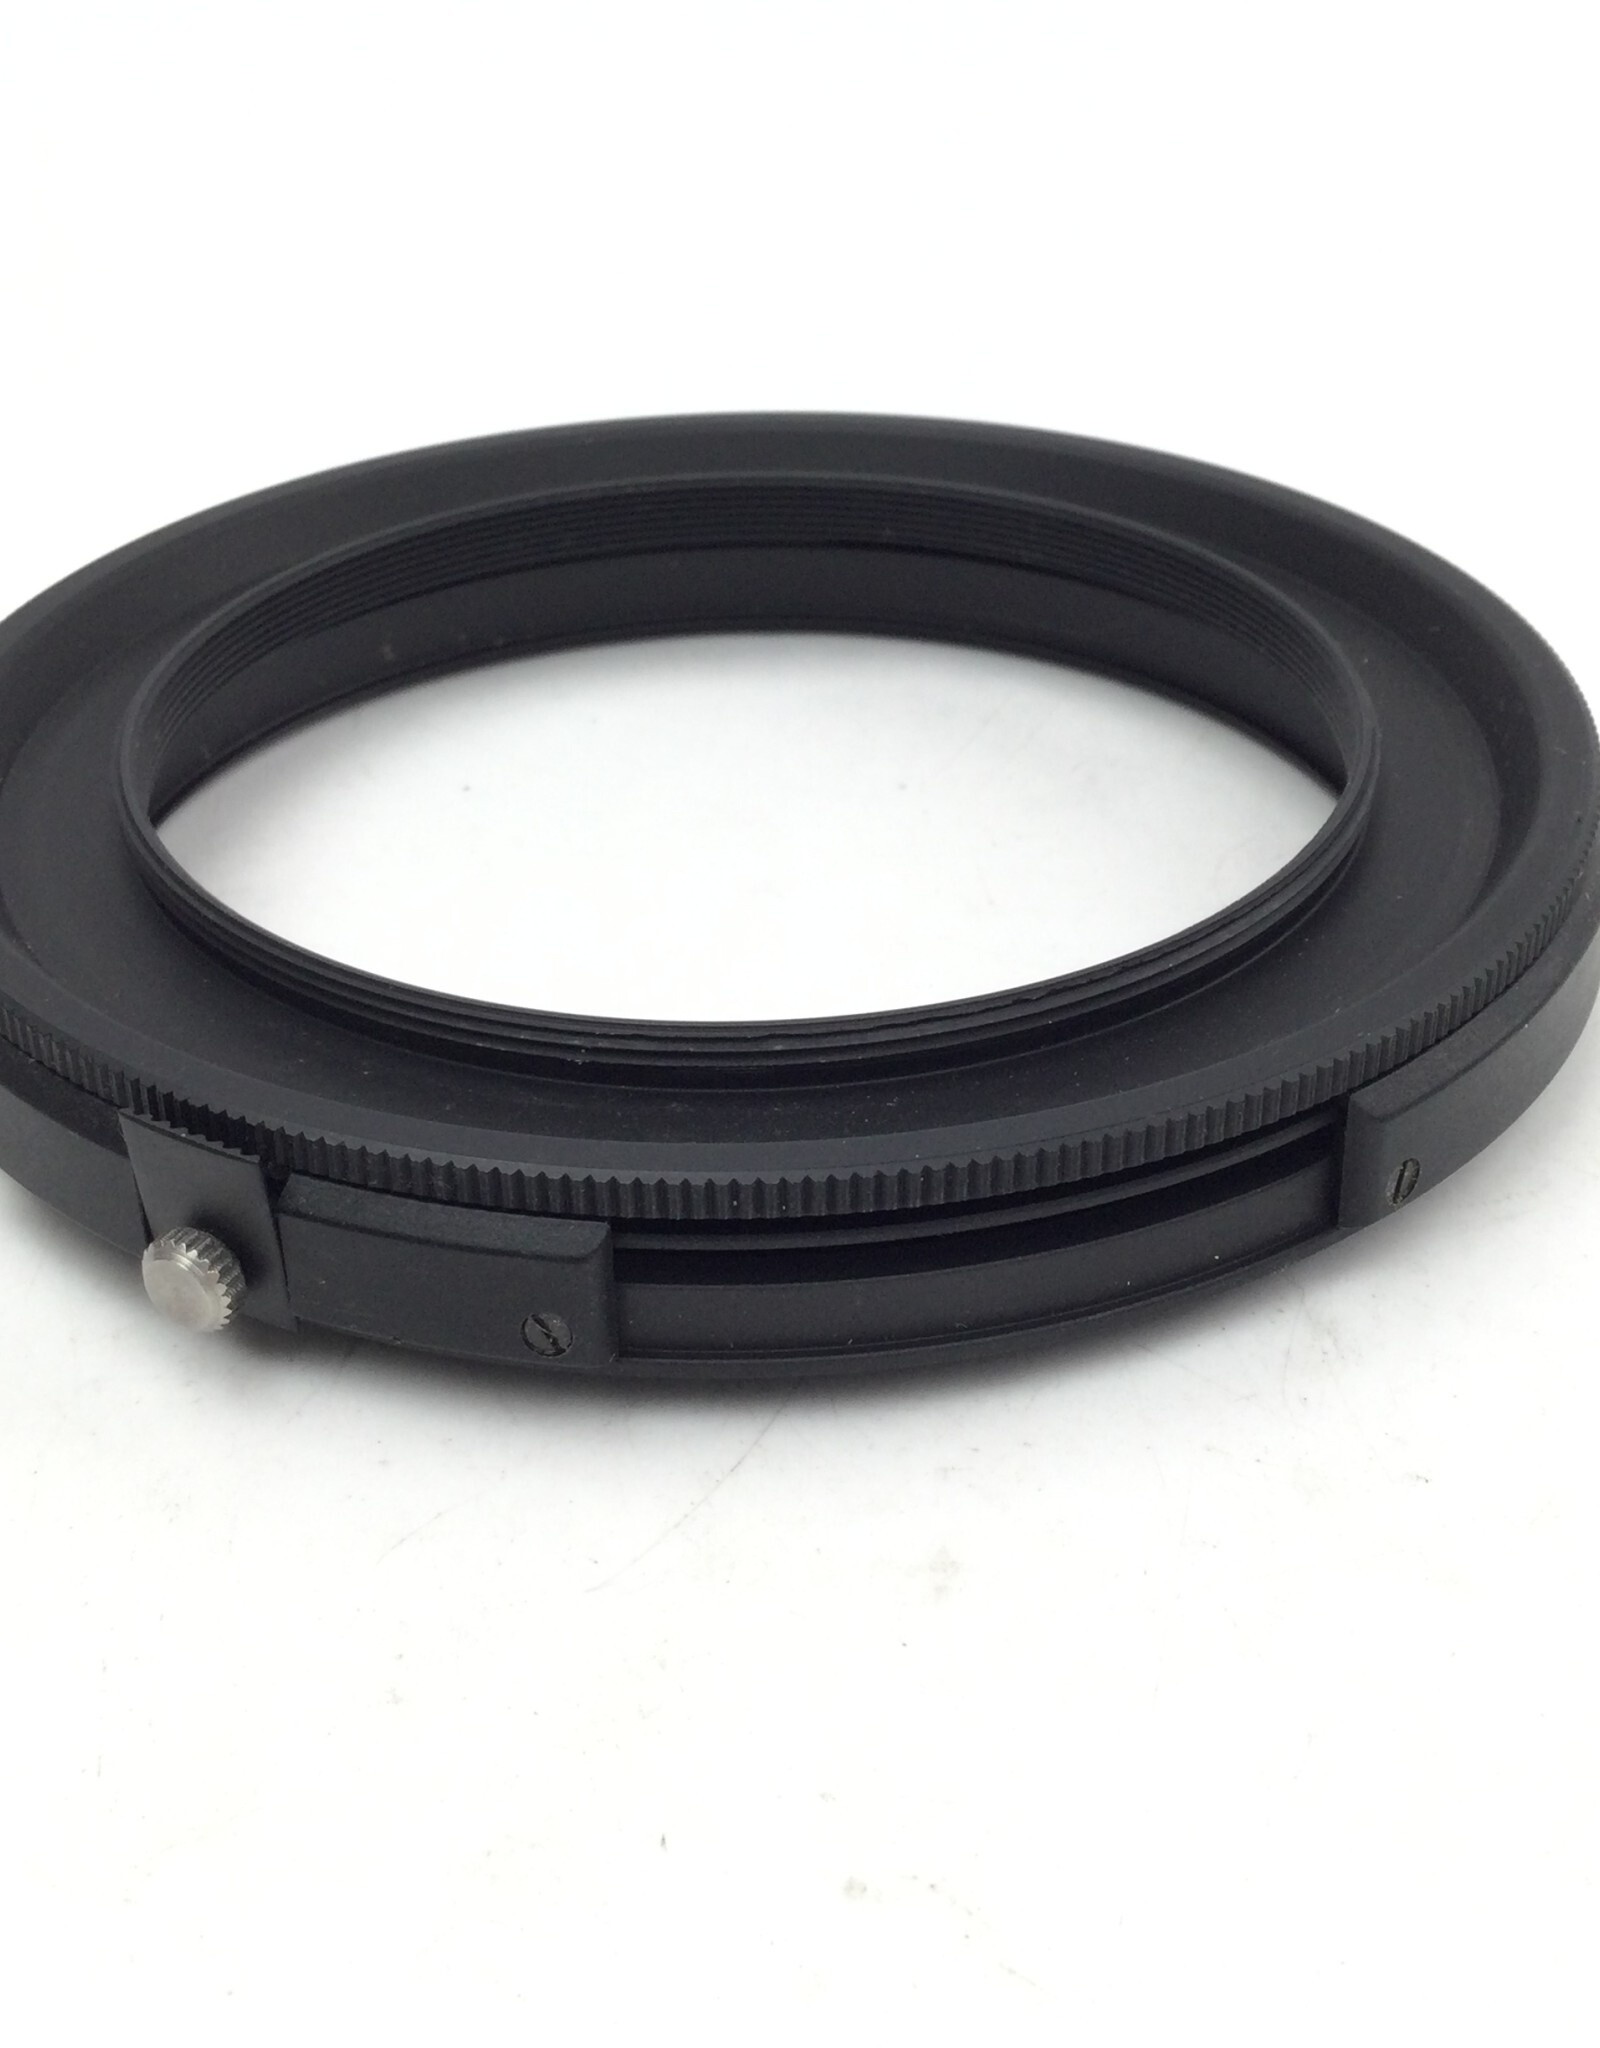 Hasselblad Hasselblad Lens Mounting Ring Bay 93 40720 Used Good